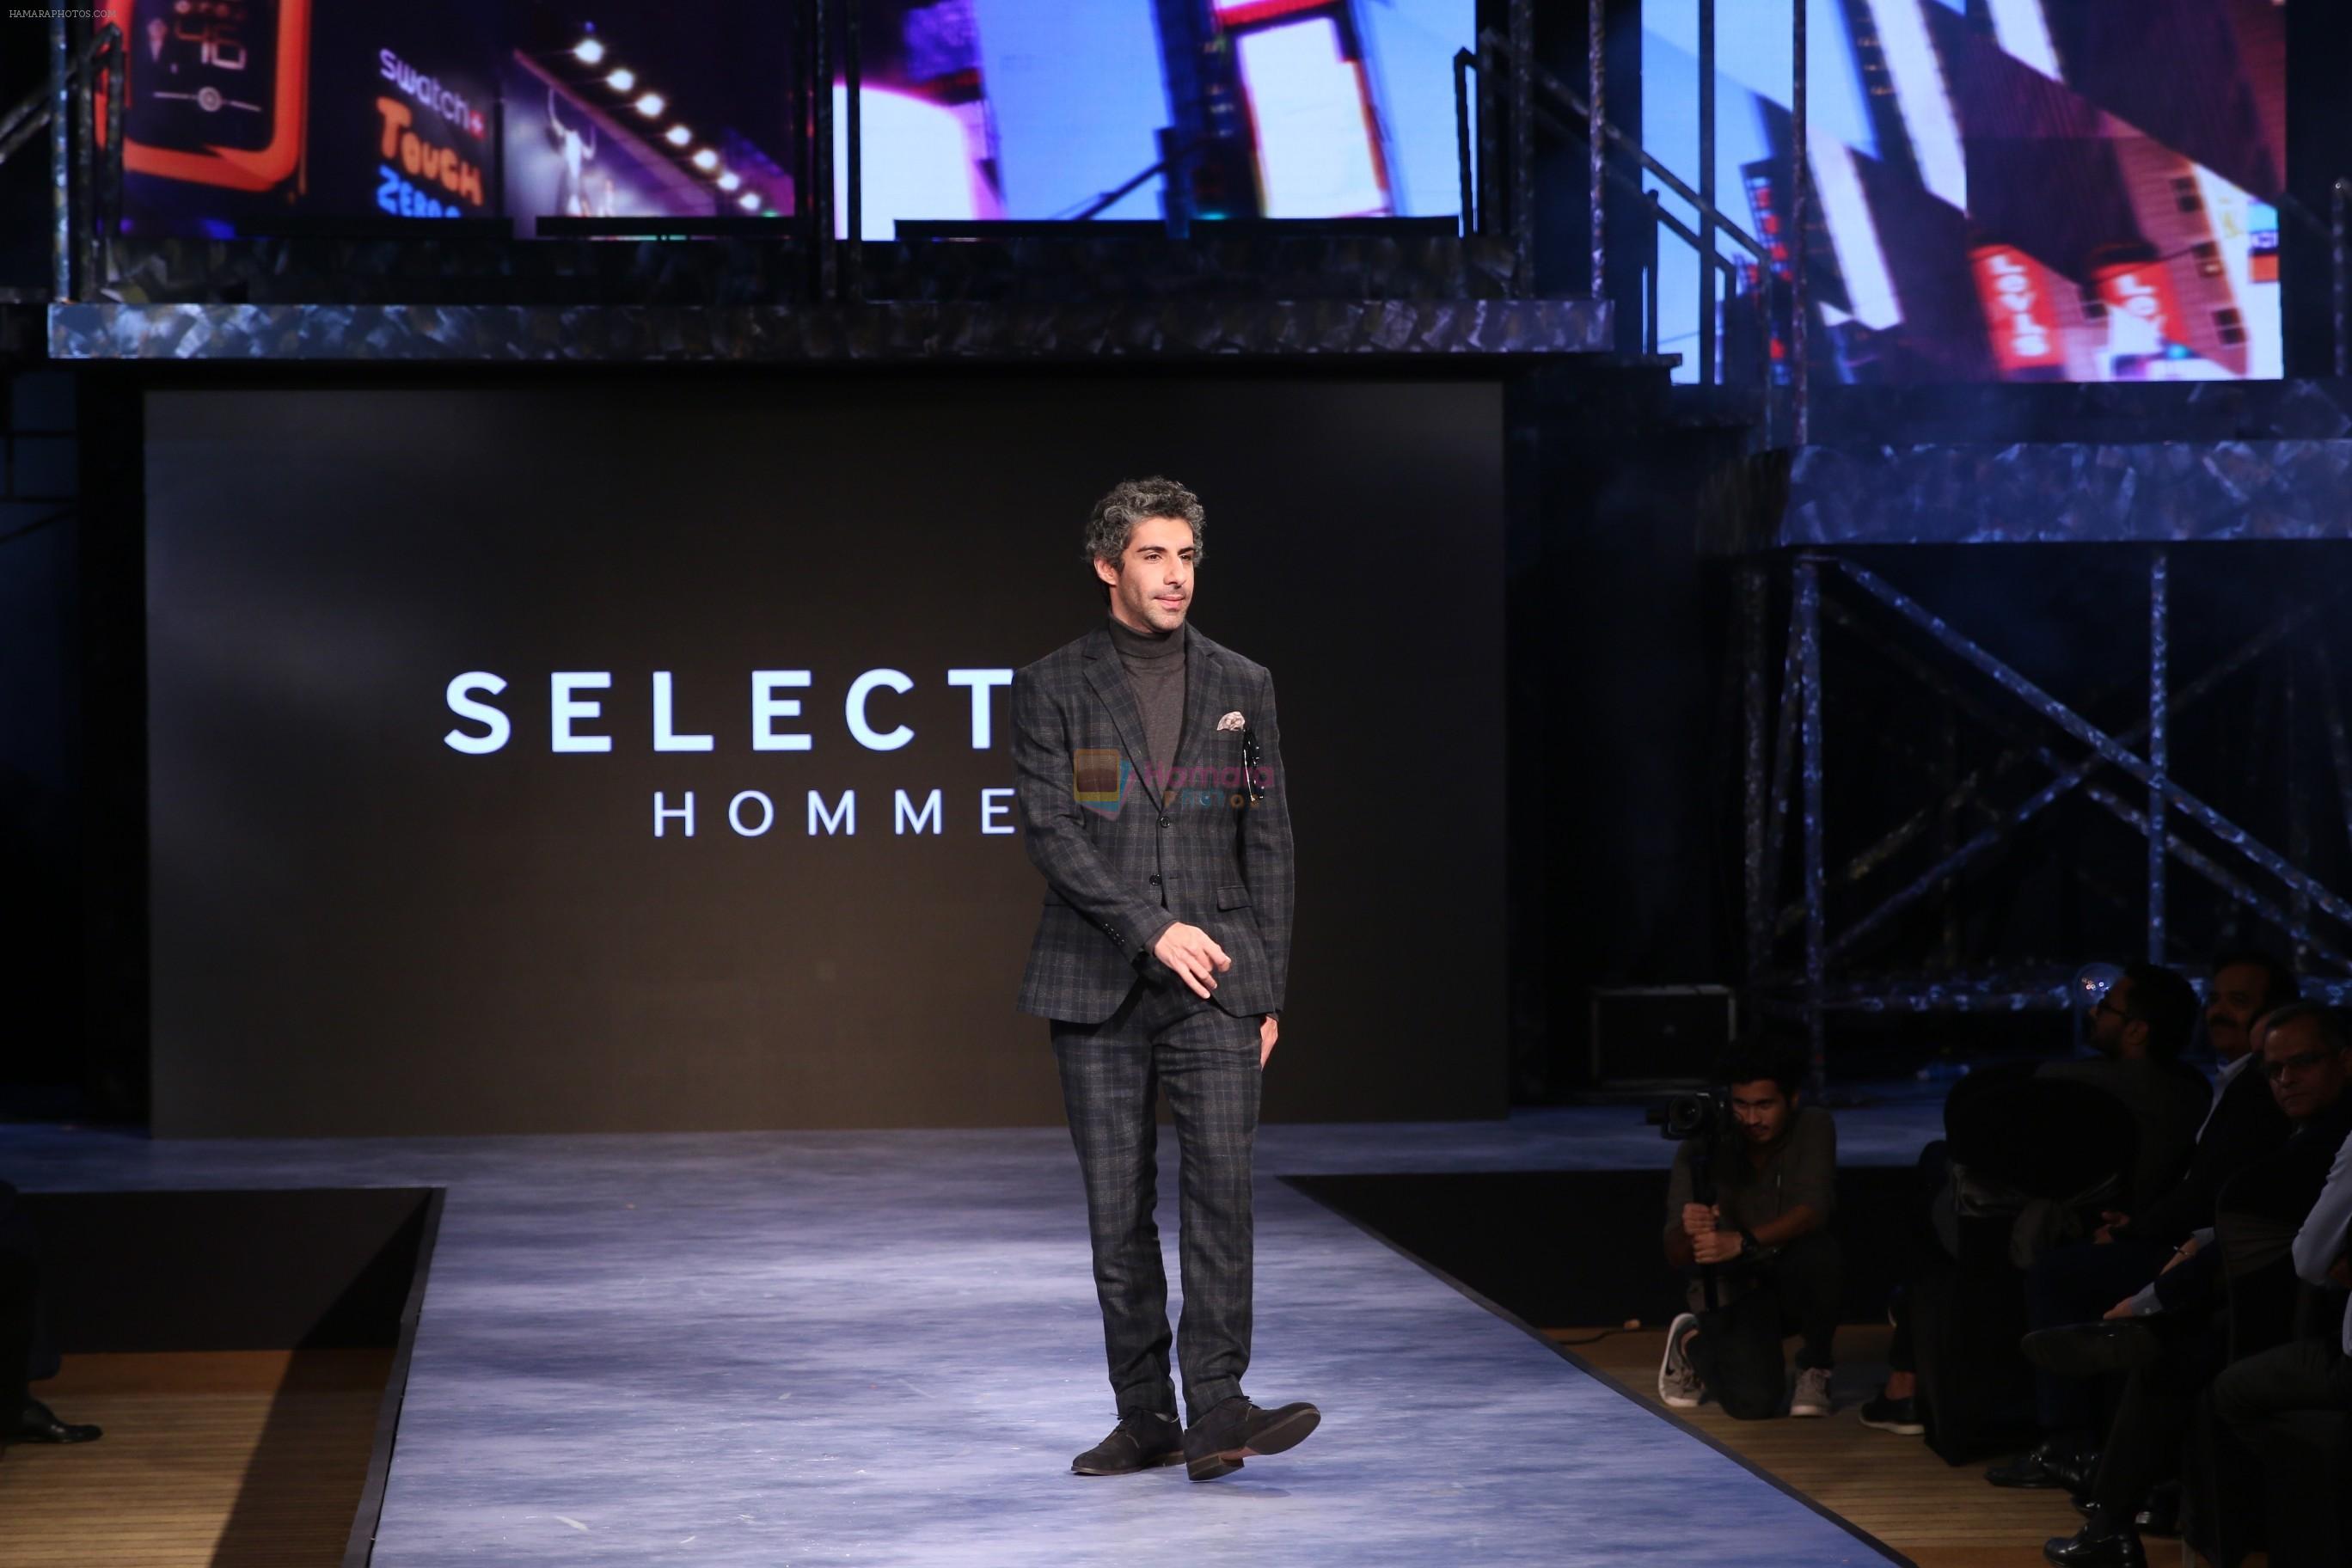 Jim Sarbh walk the Ramp at the 10 years celebration of Bestseller in grand hyatt on 8th Aug 2018